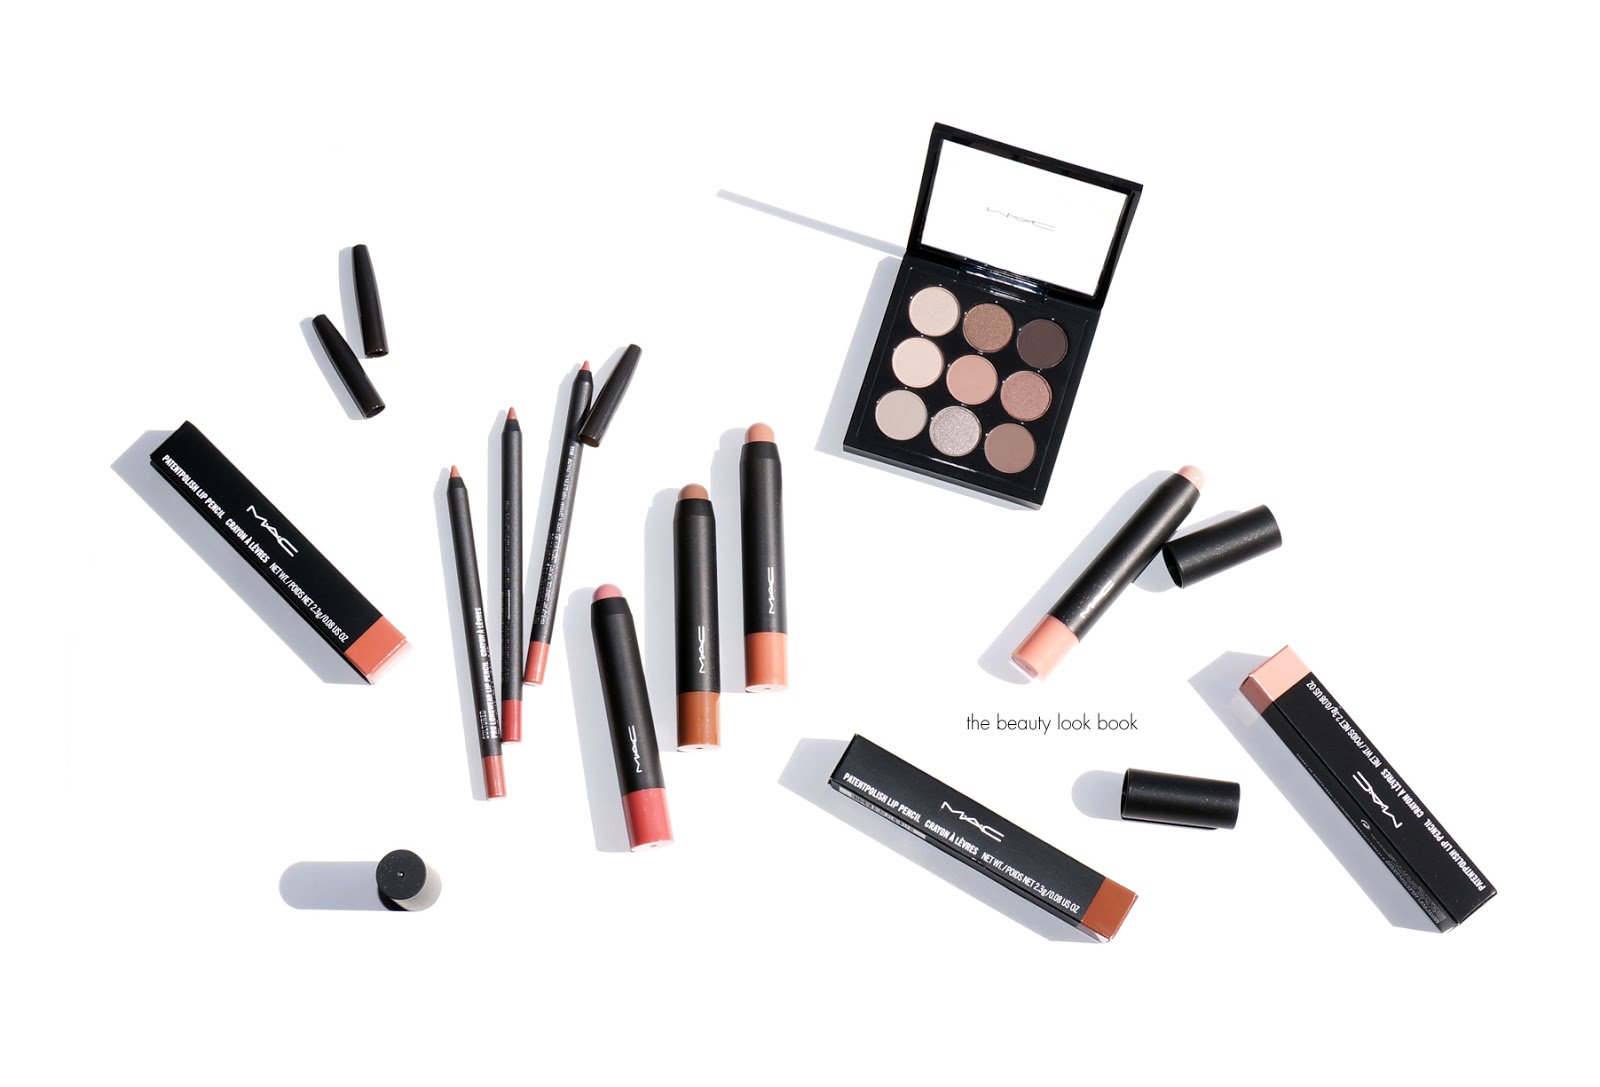 September 2015 - The Beauty Look Book